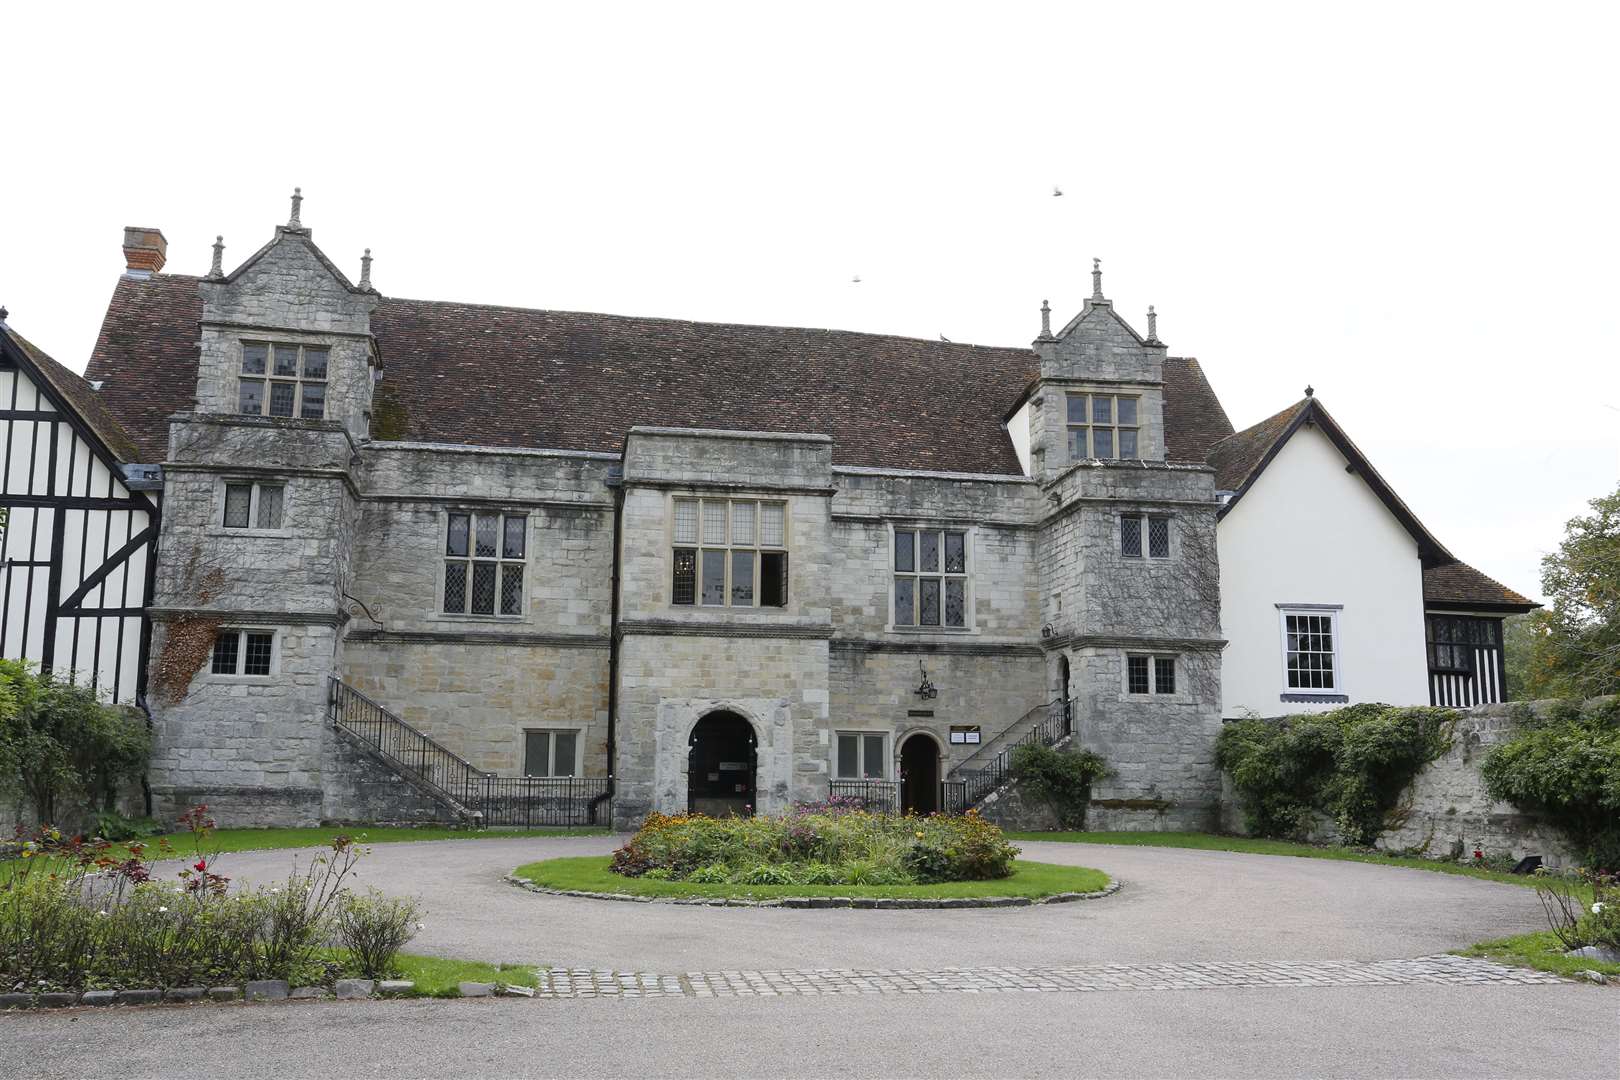 The inquest took place at Archbishop's Palace